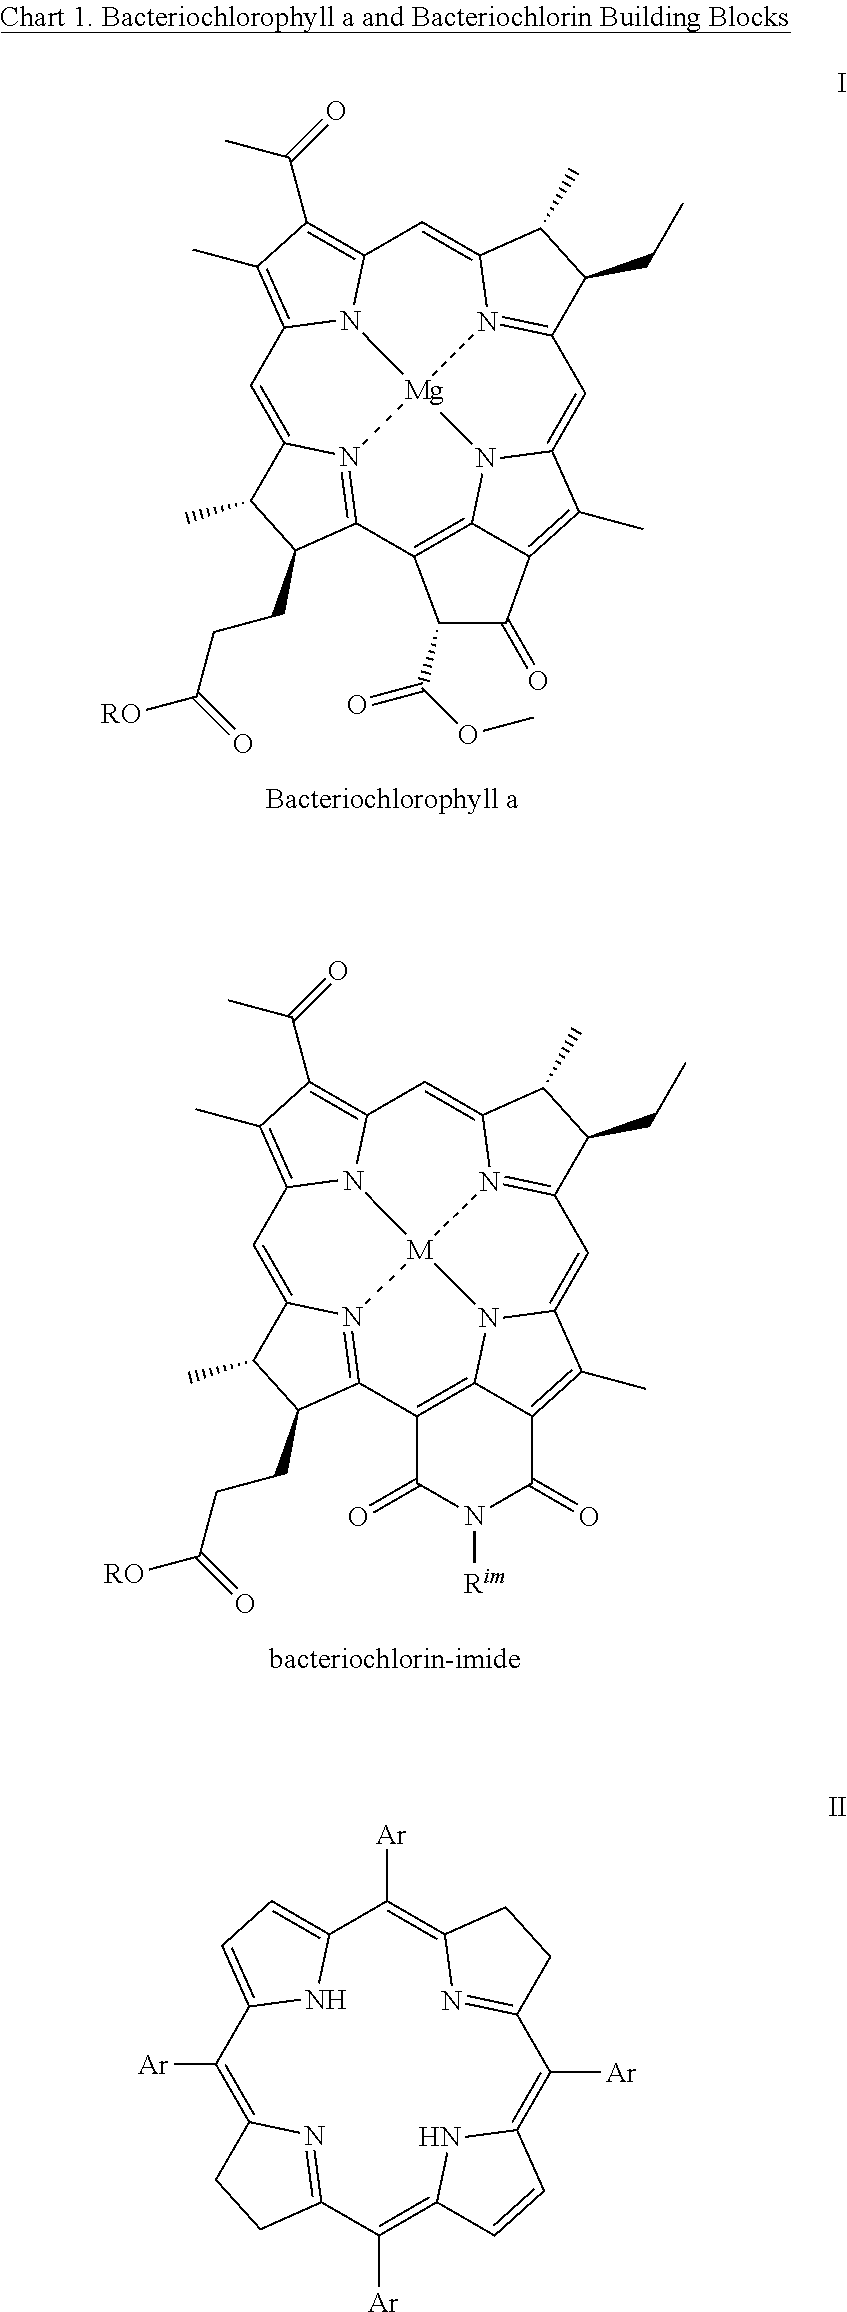 Routes to trans A,B-substituted bacteriochlorins